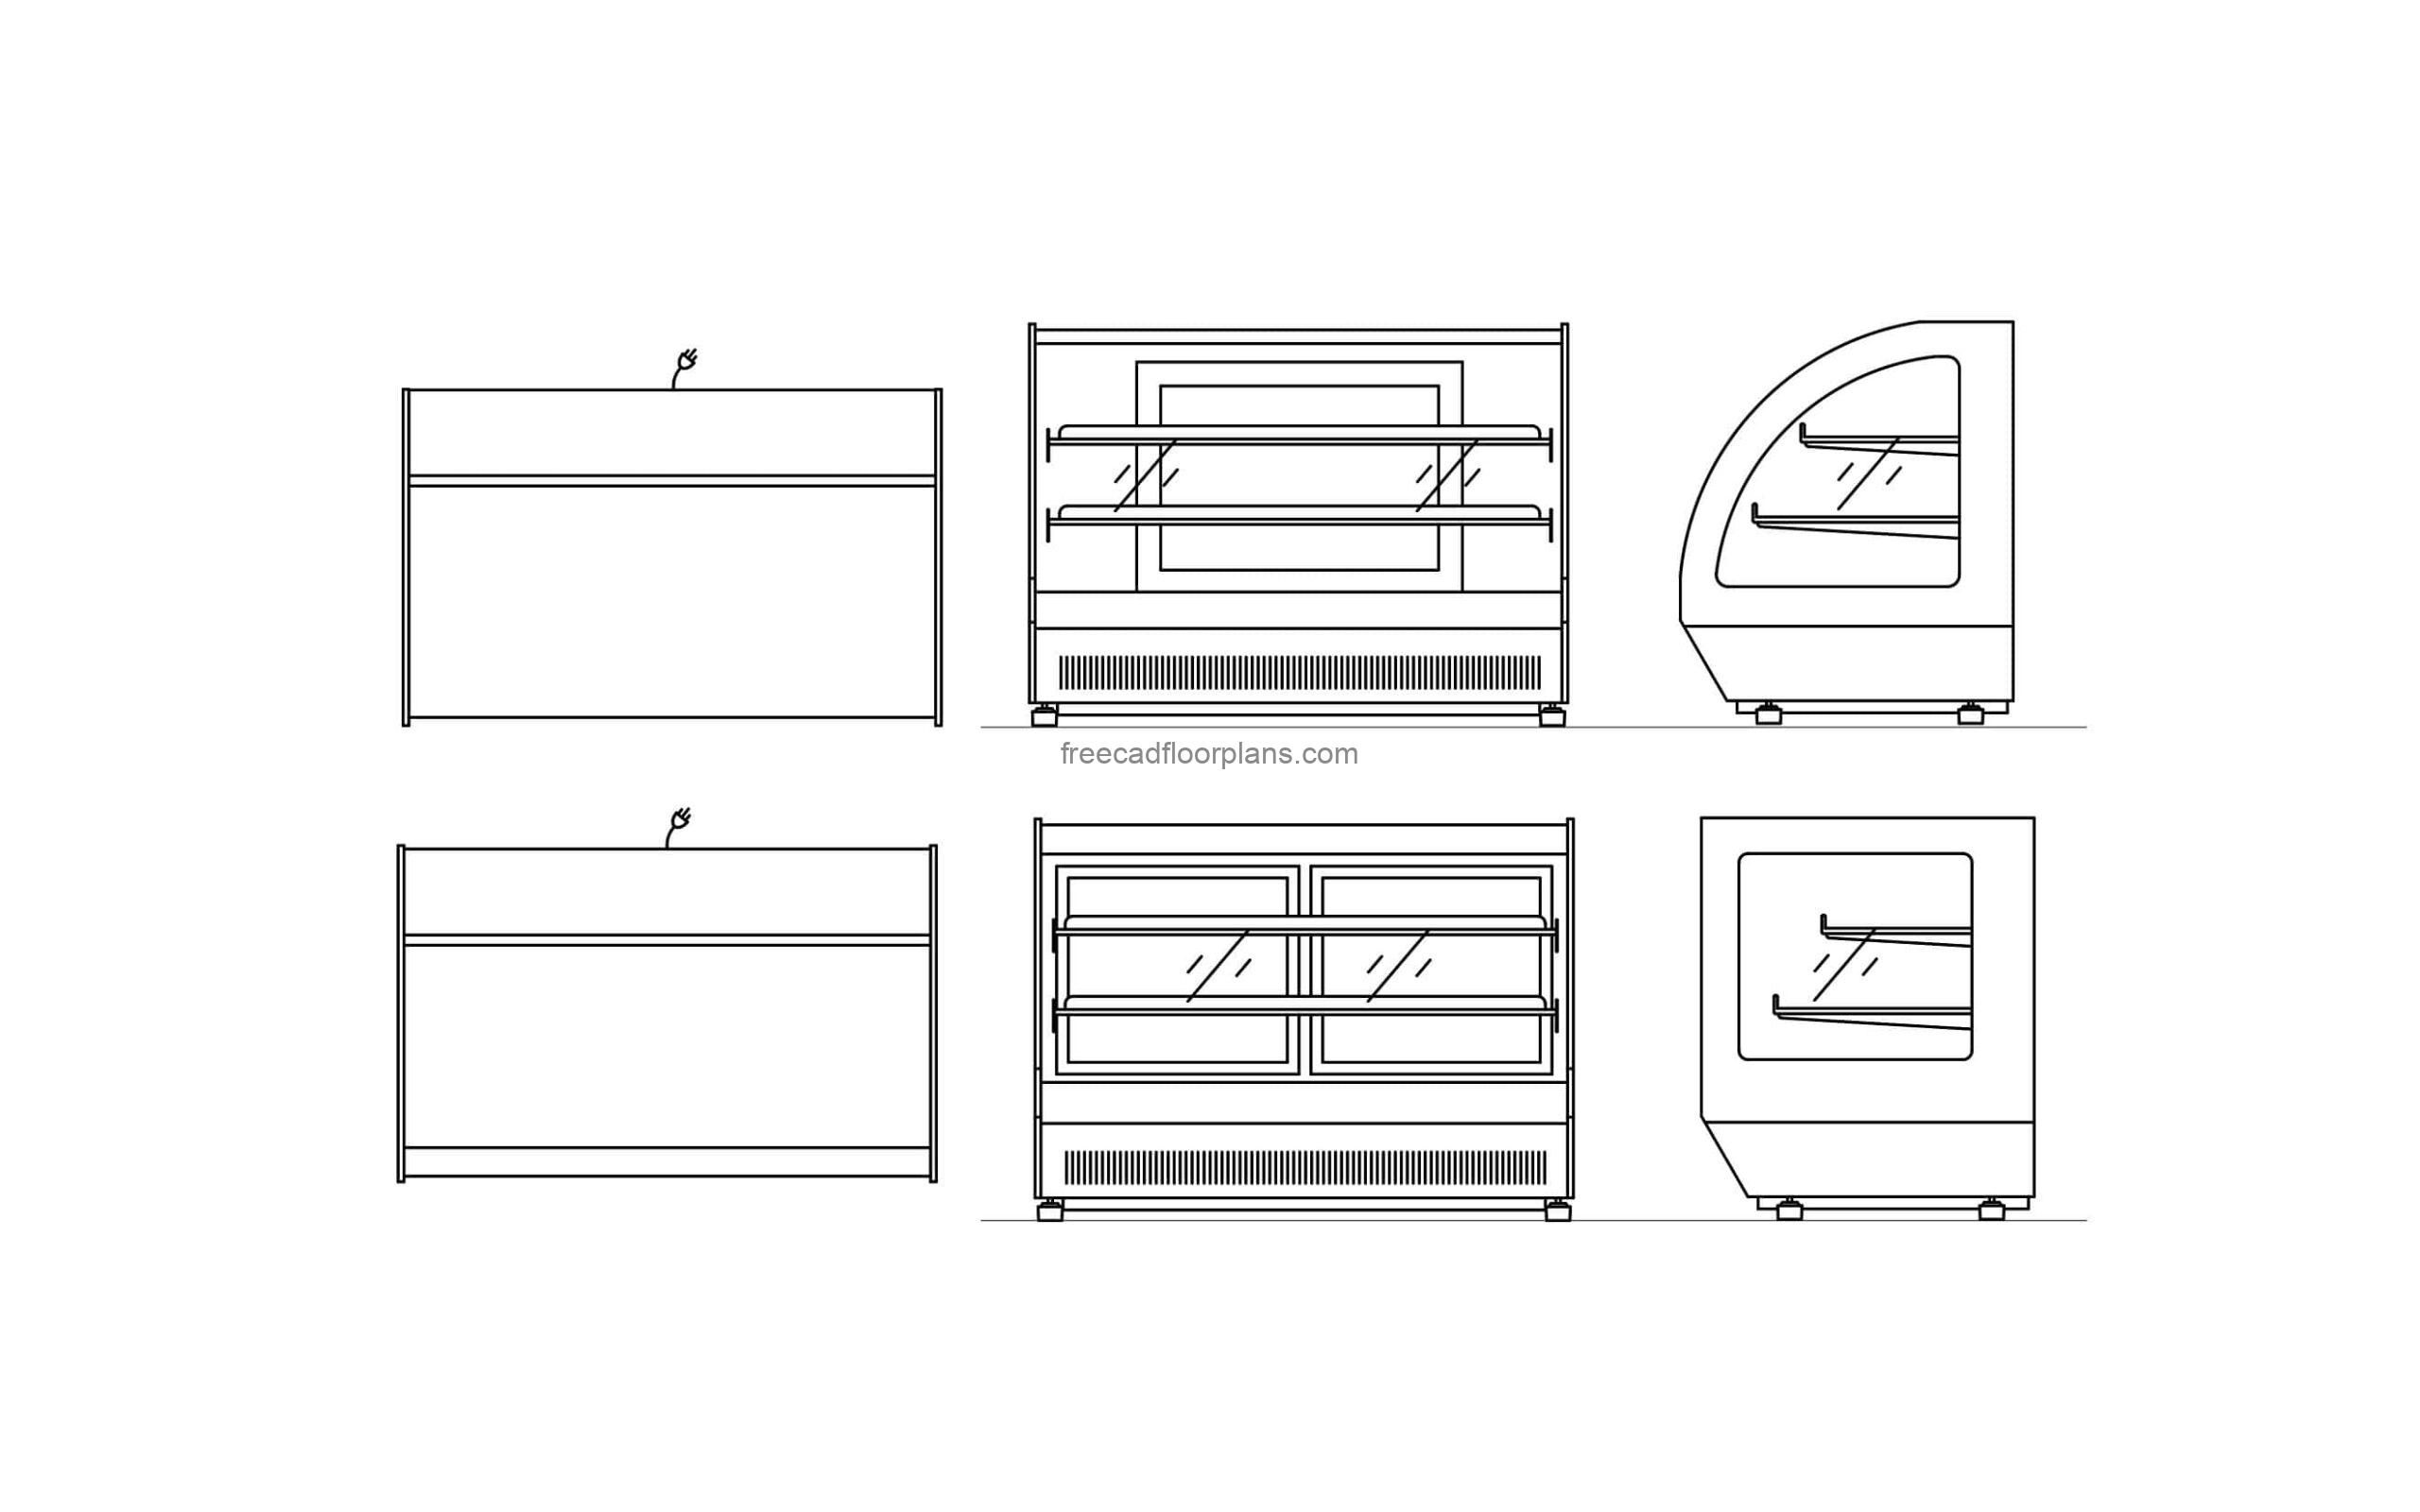 cad block drawing of a refrigerated cake display case all 2d views, plan and elevations ,file for free download